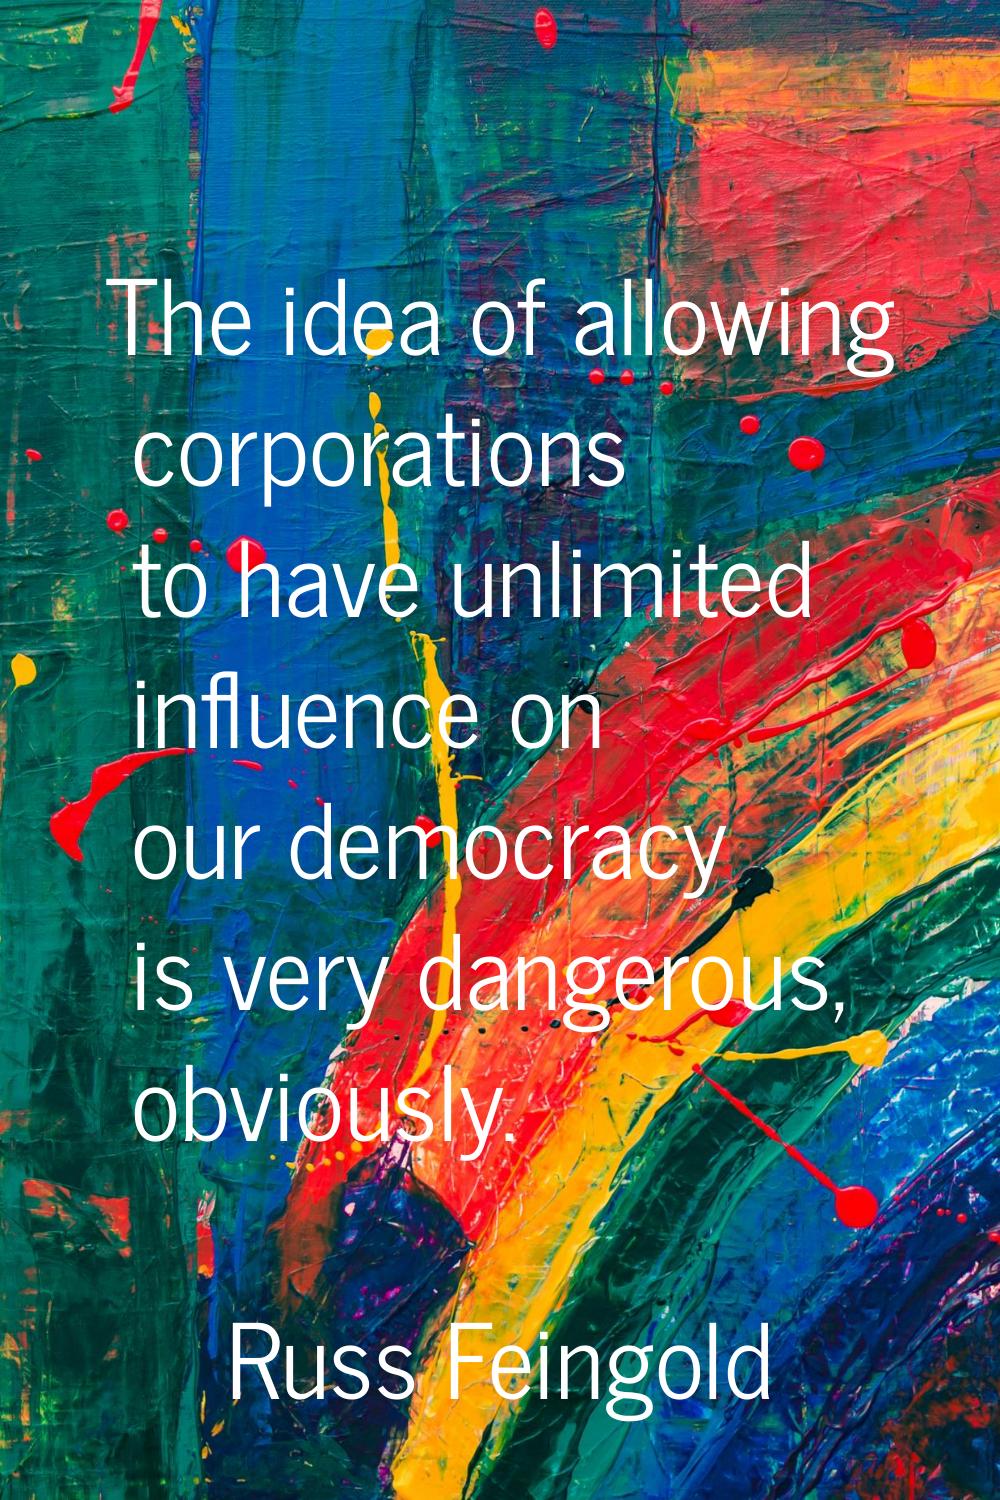 The idea of allowing corporations to have unlimited influence on our democracy is very dangerous, o